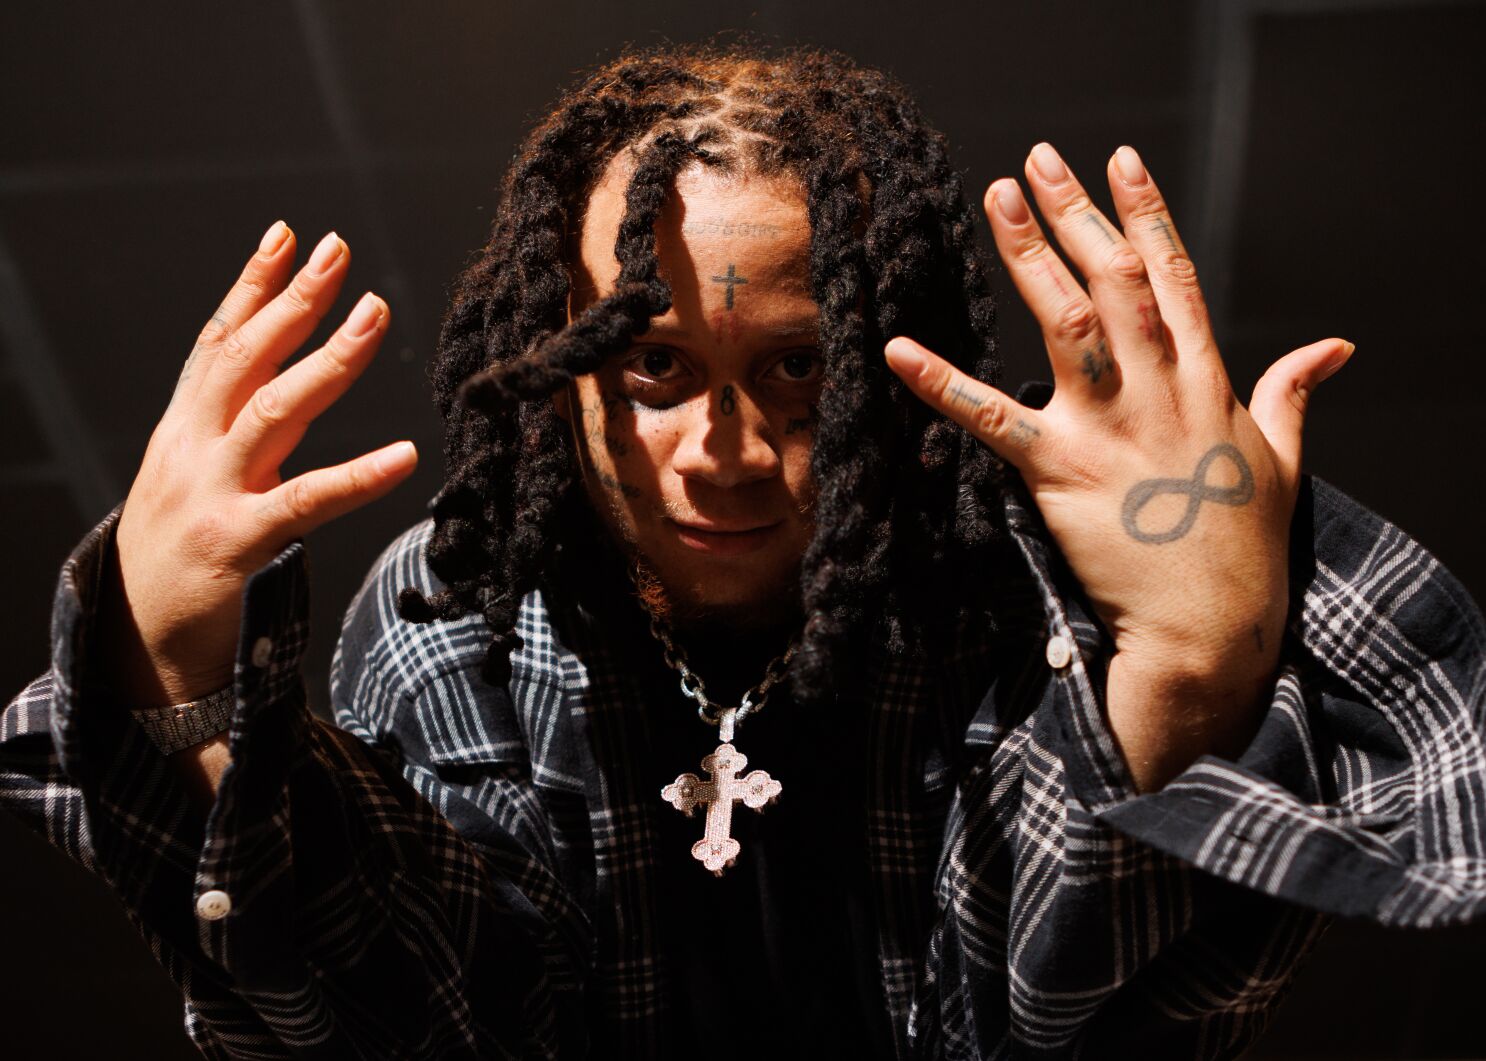 risiko gnier antik Trippie Redd proves there's life after SoundCloud rap - Los Angeles Times